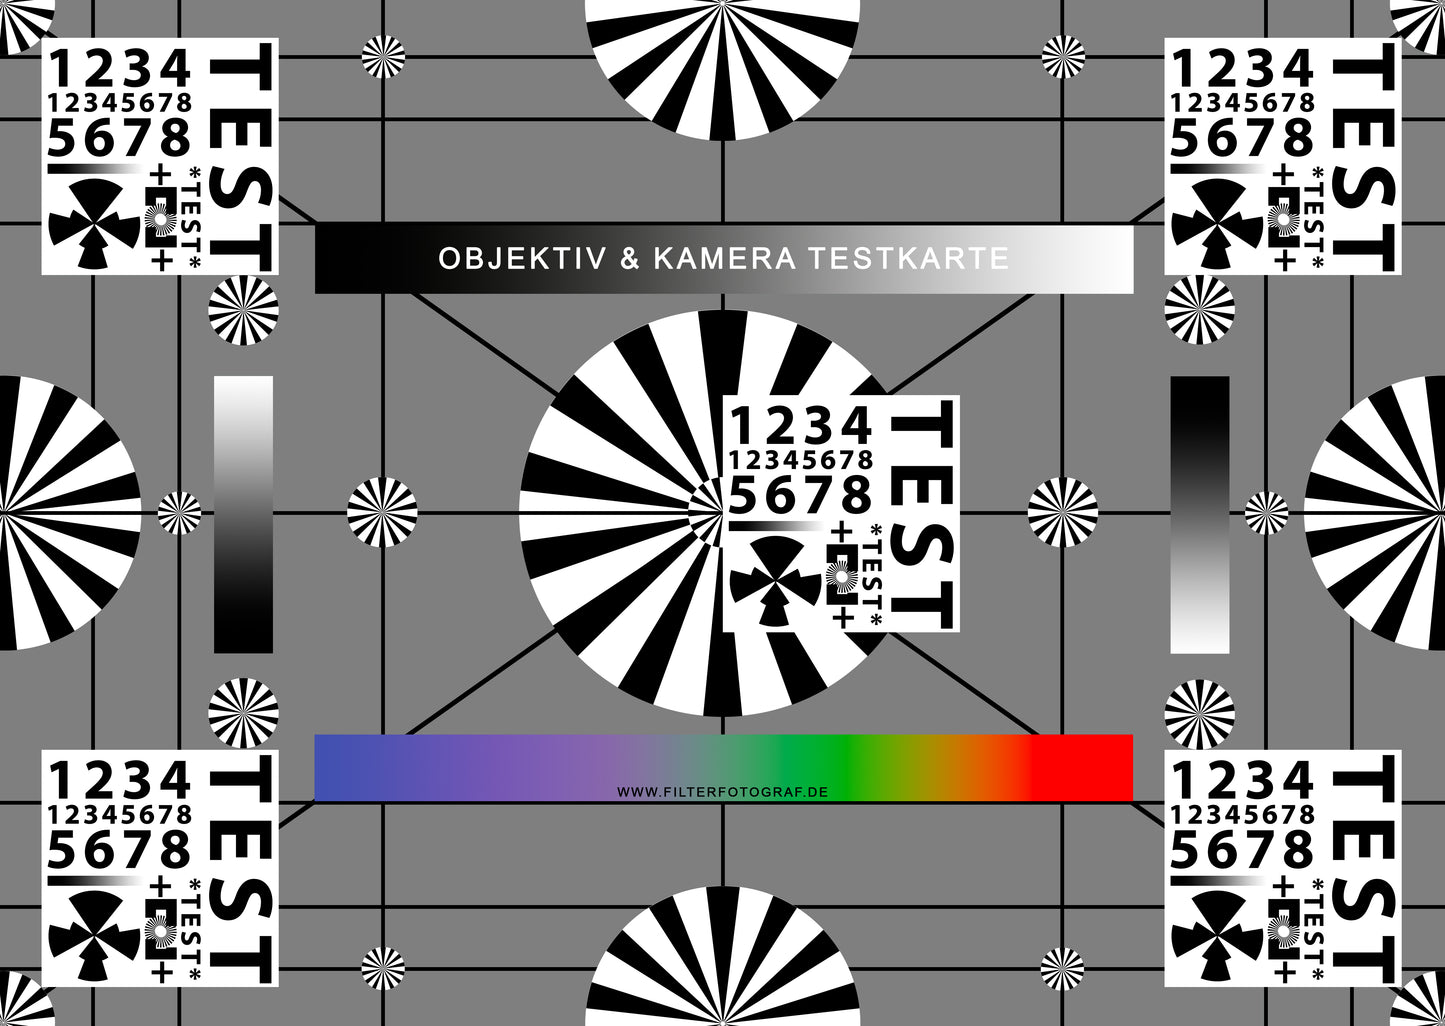 Test card for lenses and cameras - test card for lens quality from Filterfotograf